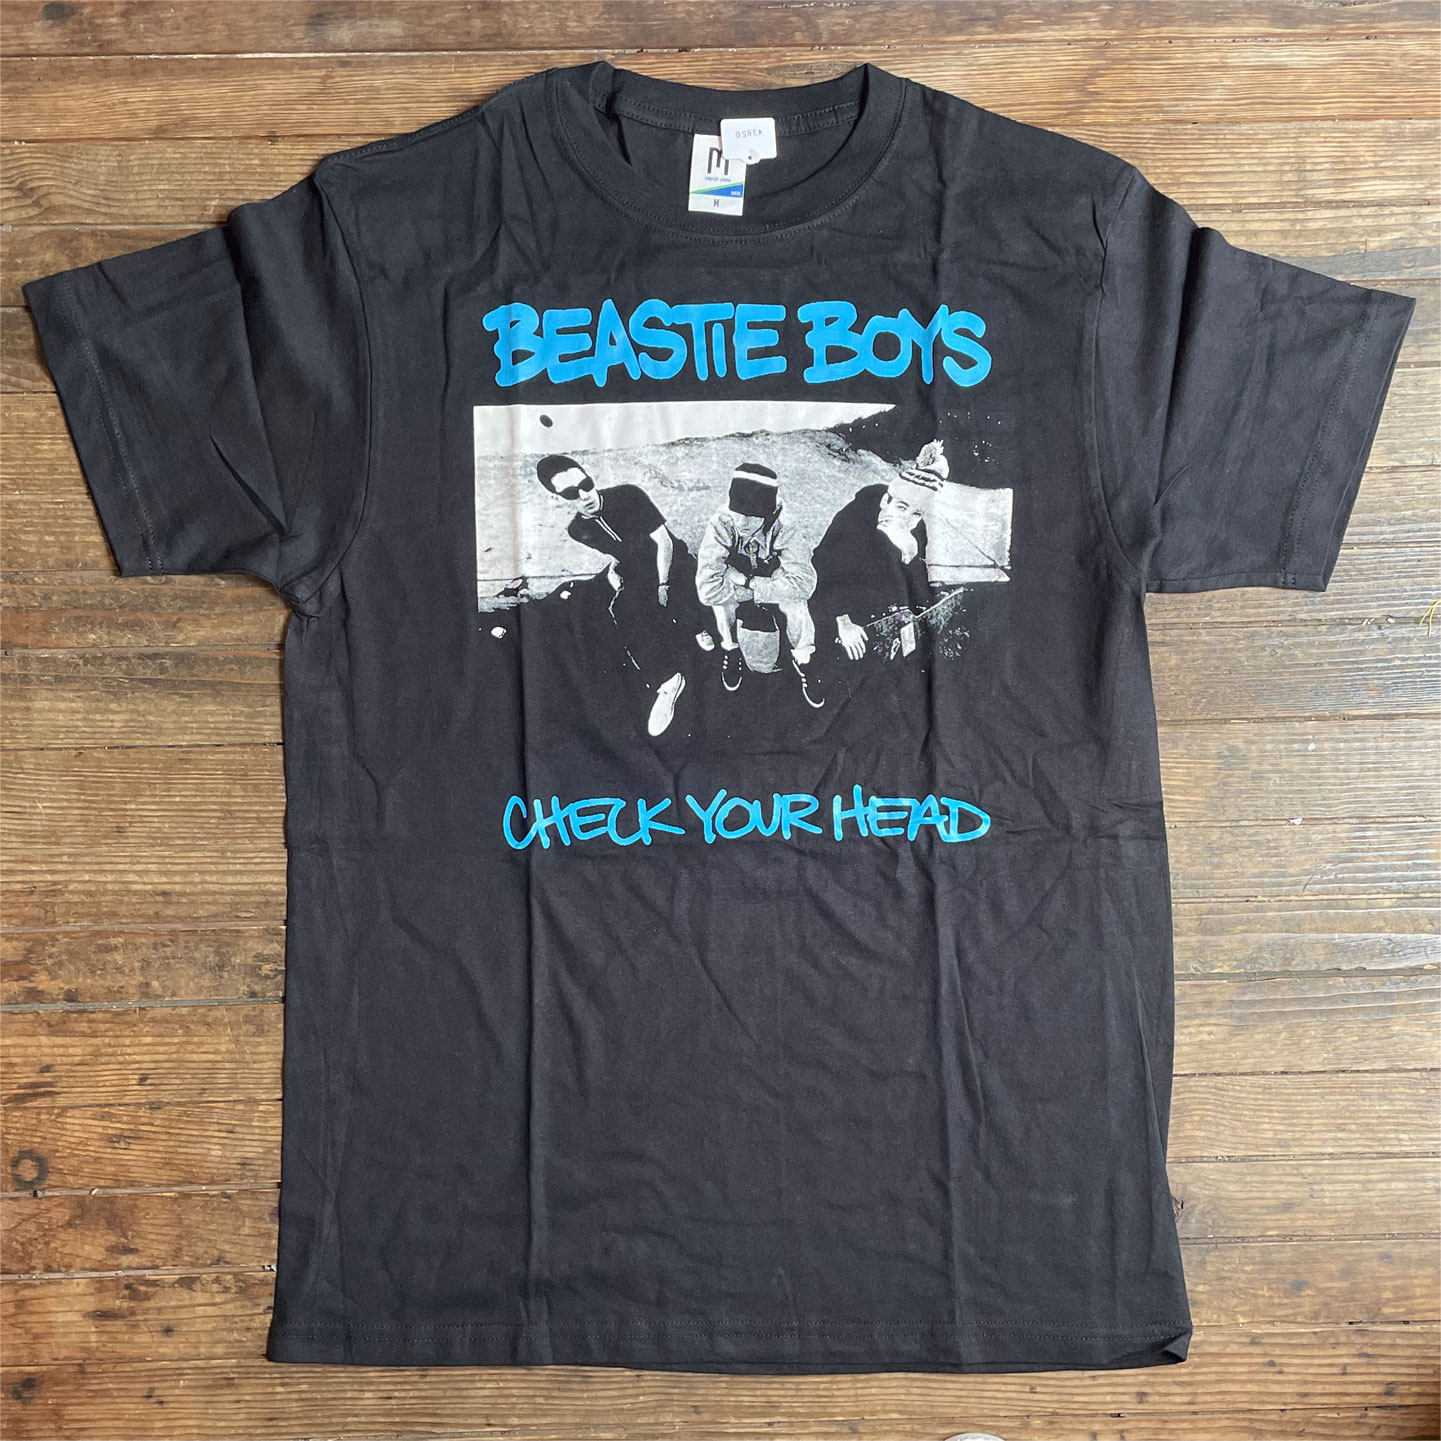 BEASTIE BOYS CHECK YOUR HEADヴィンテージTシャツ | www.causus.be